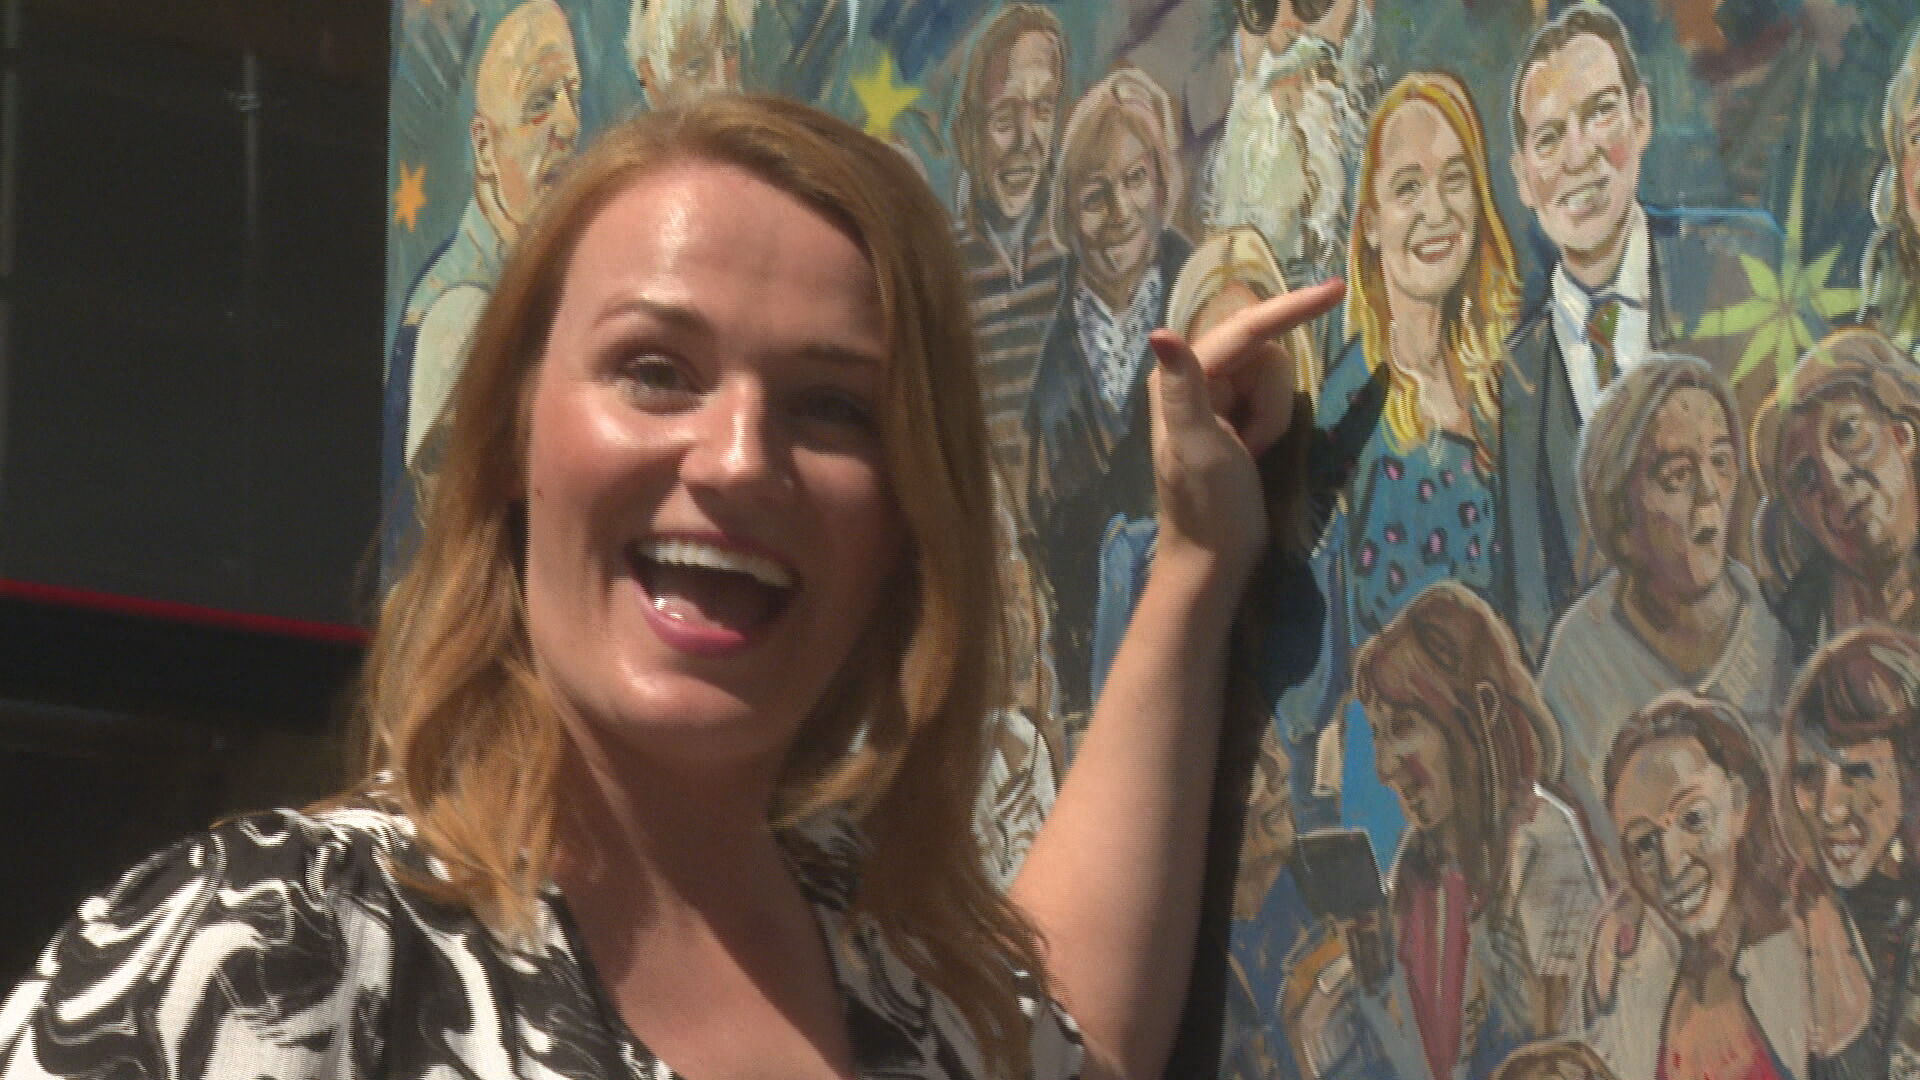 STV reporter Laura Alderman was also featured in the mural. 